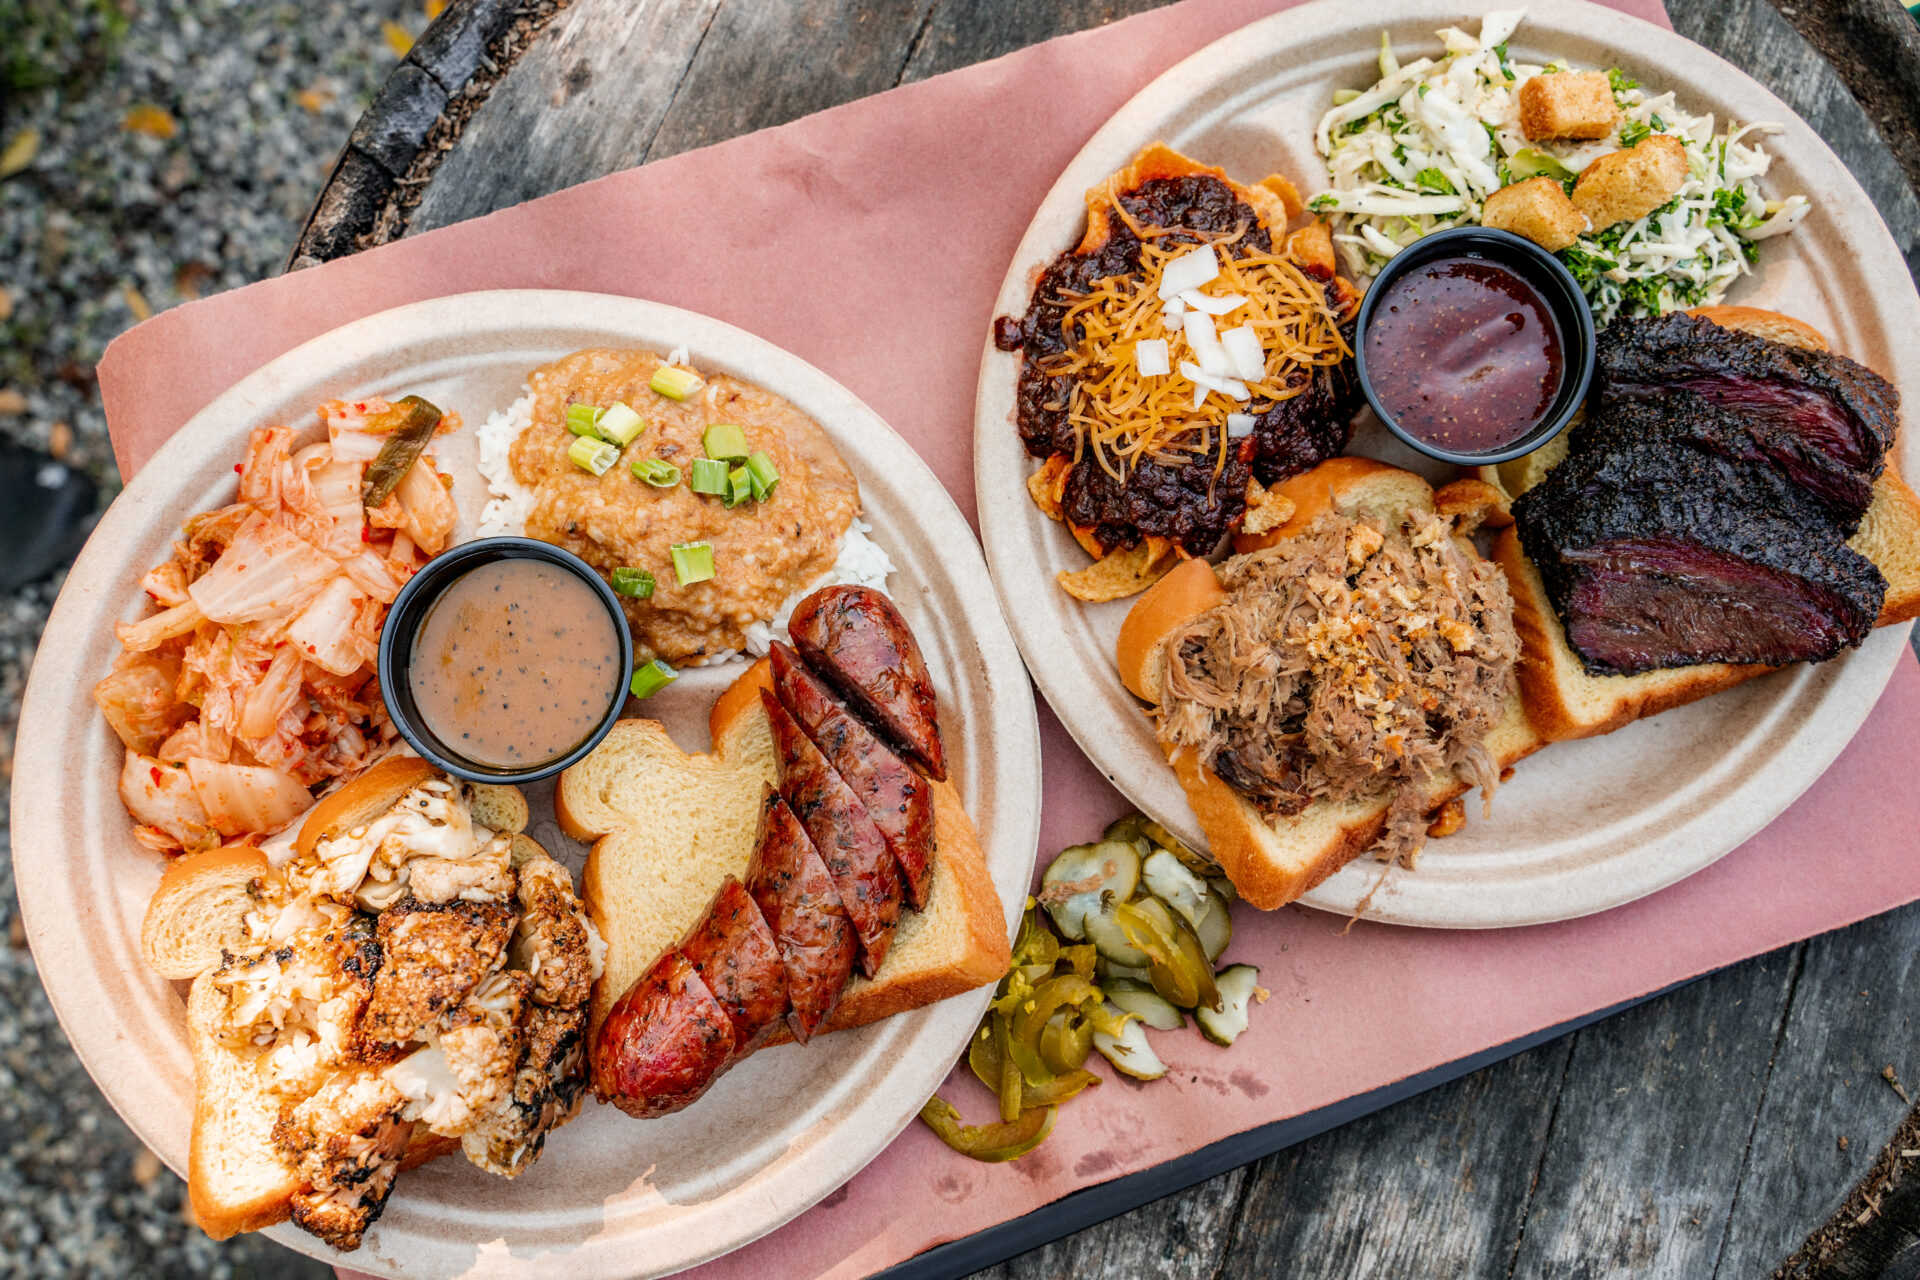 Plates of barbecue piled high at Leroy & Lewis, set to open in 2024